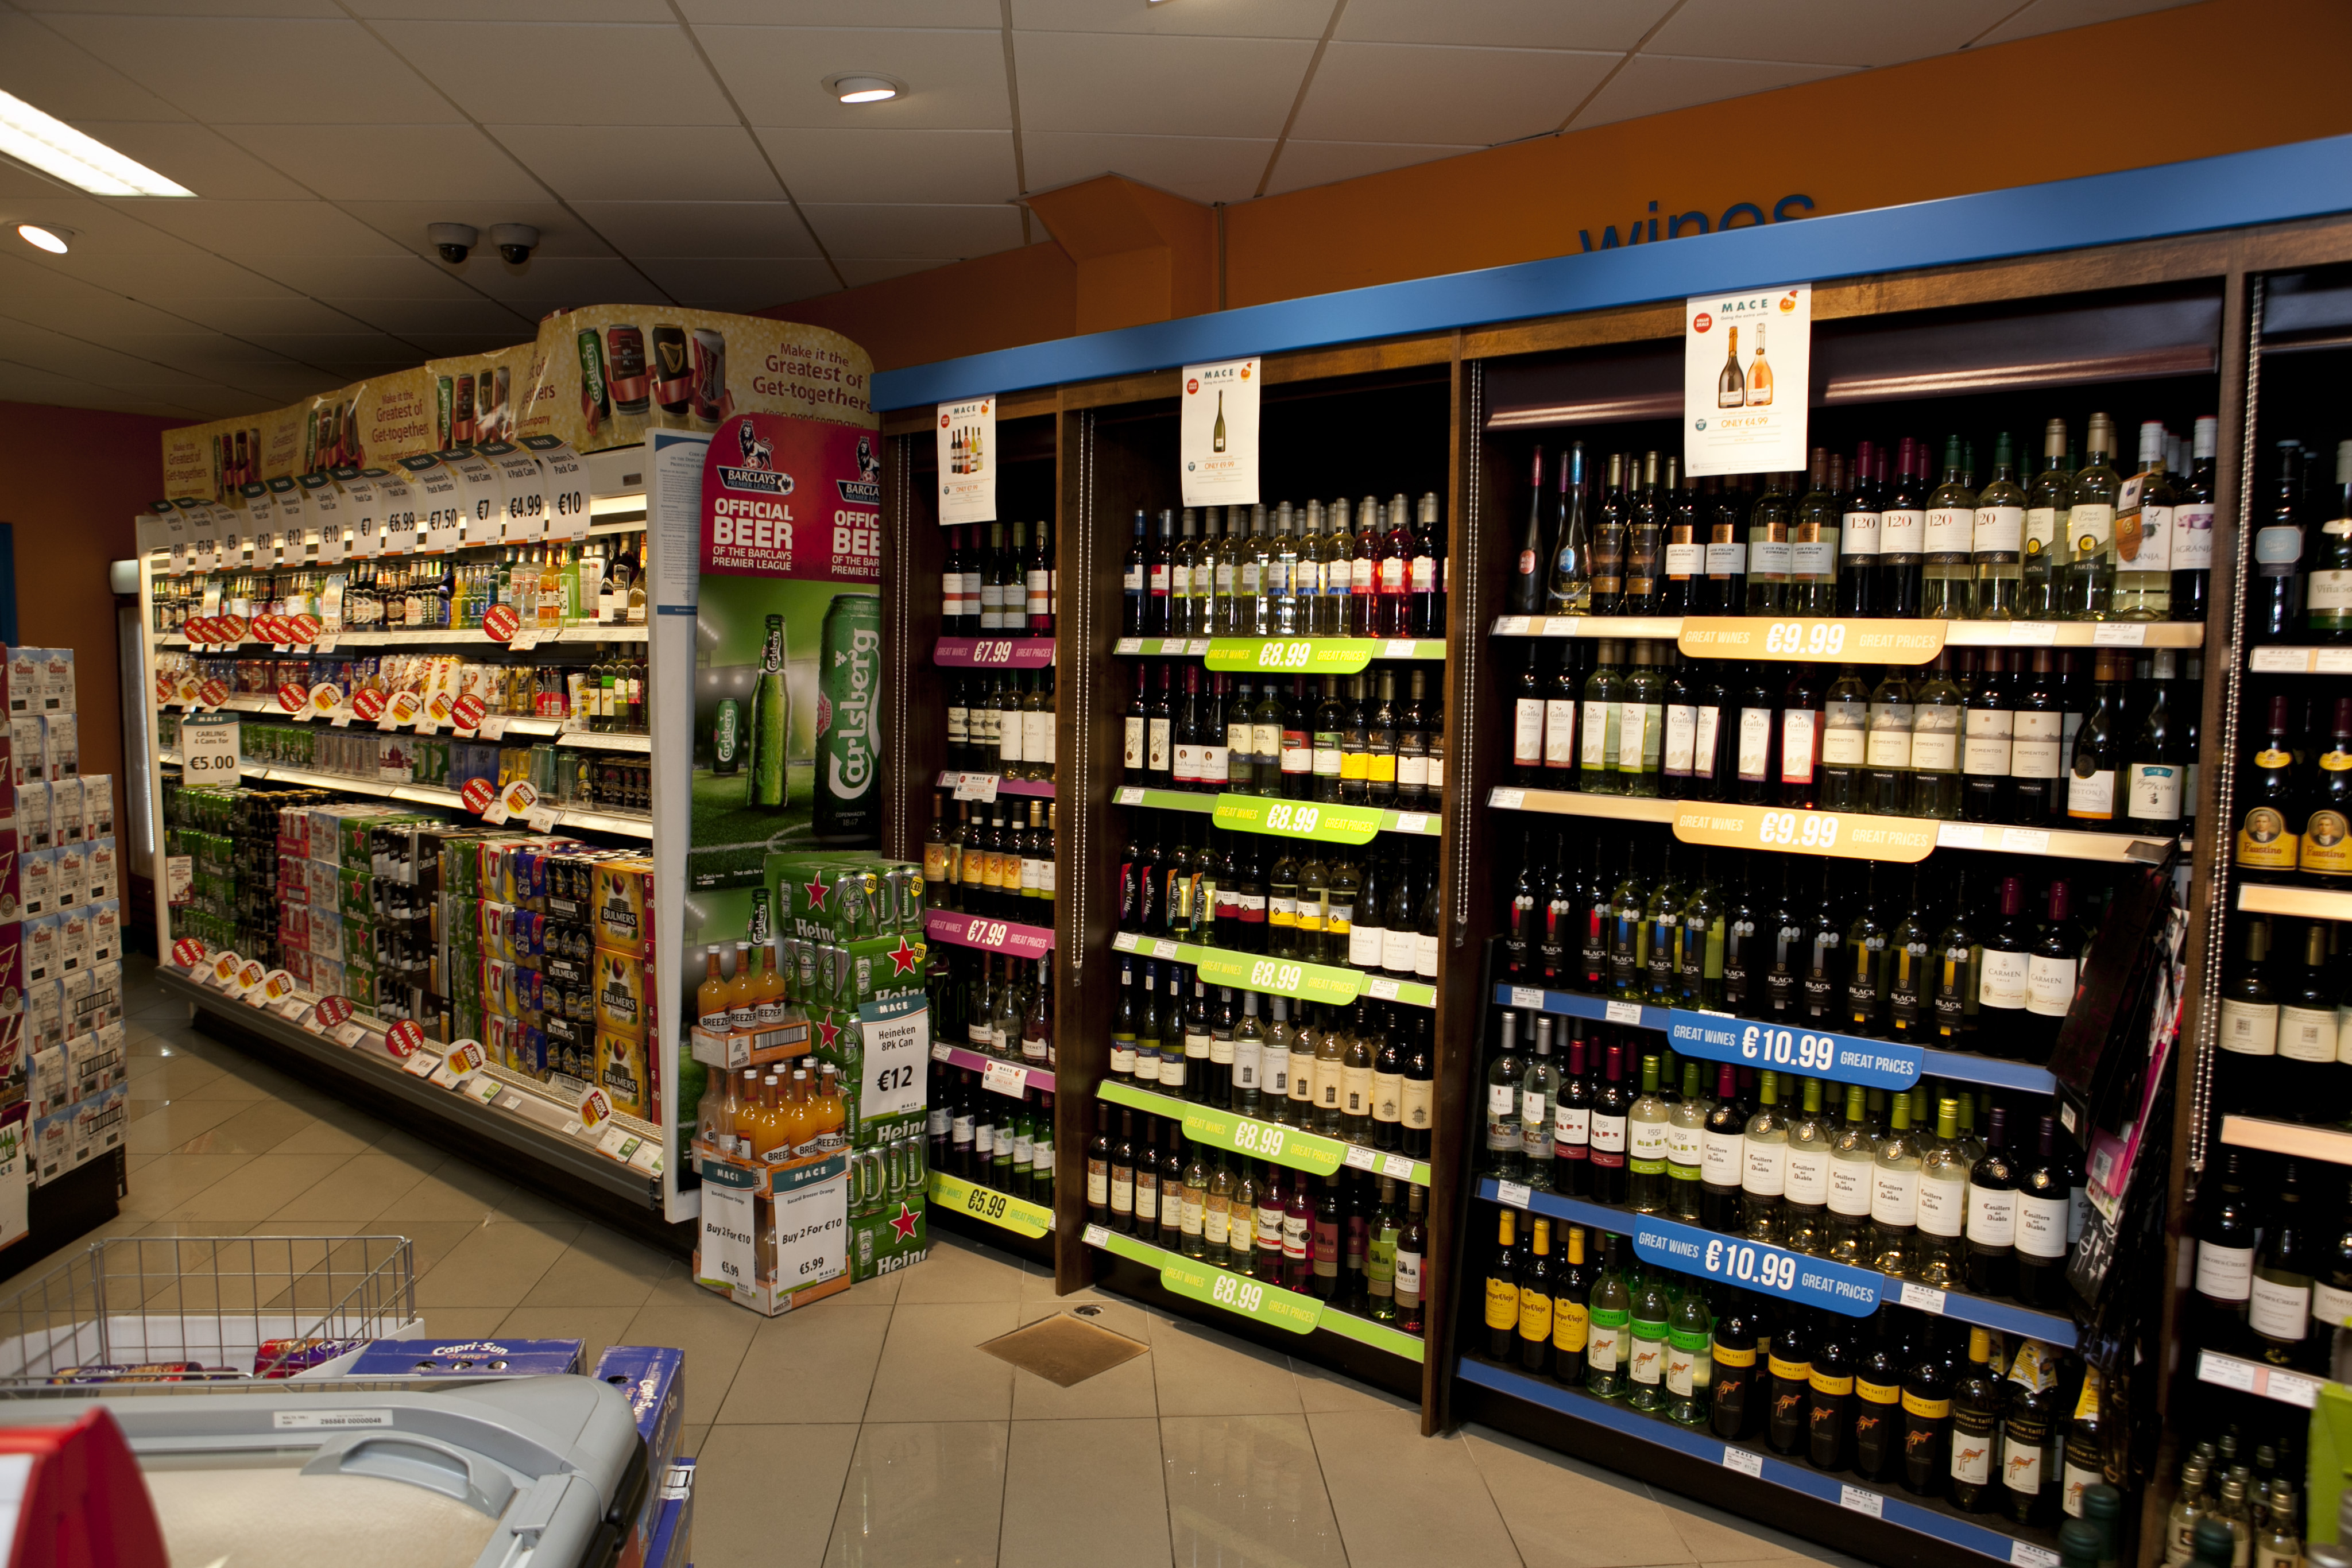 The new off-licence now accounts for around 10% of the business